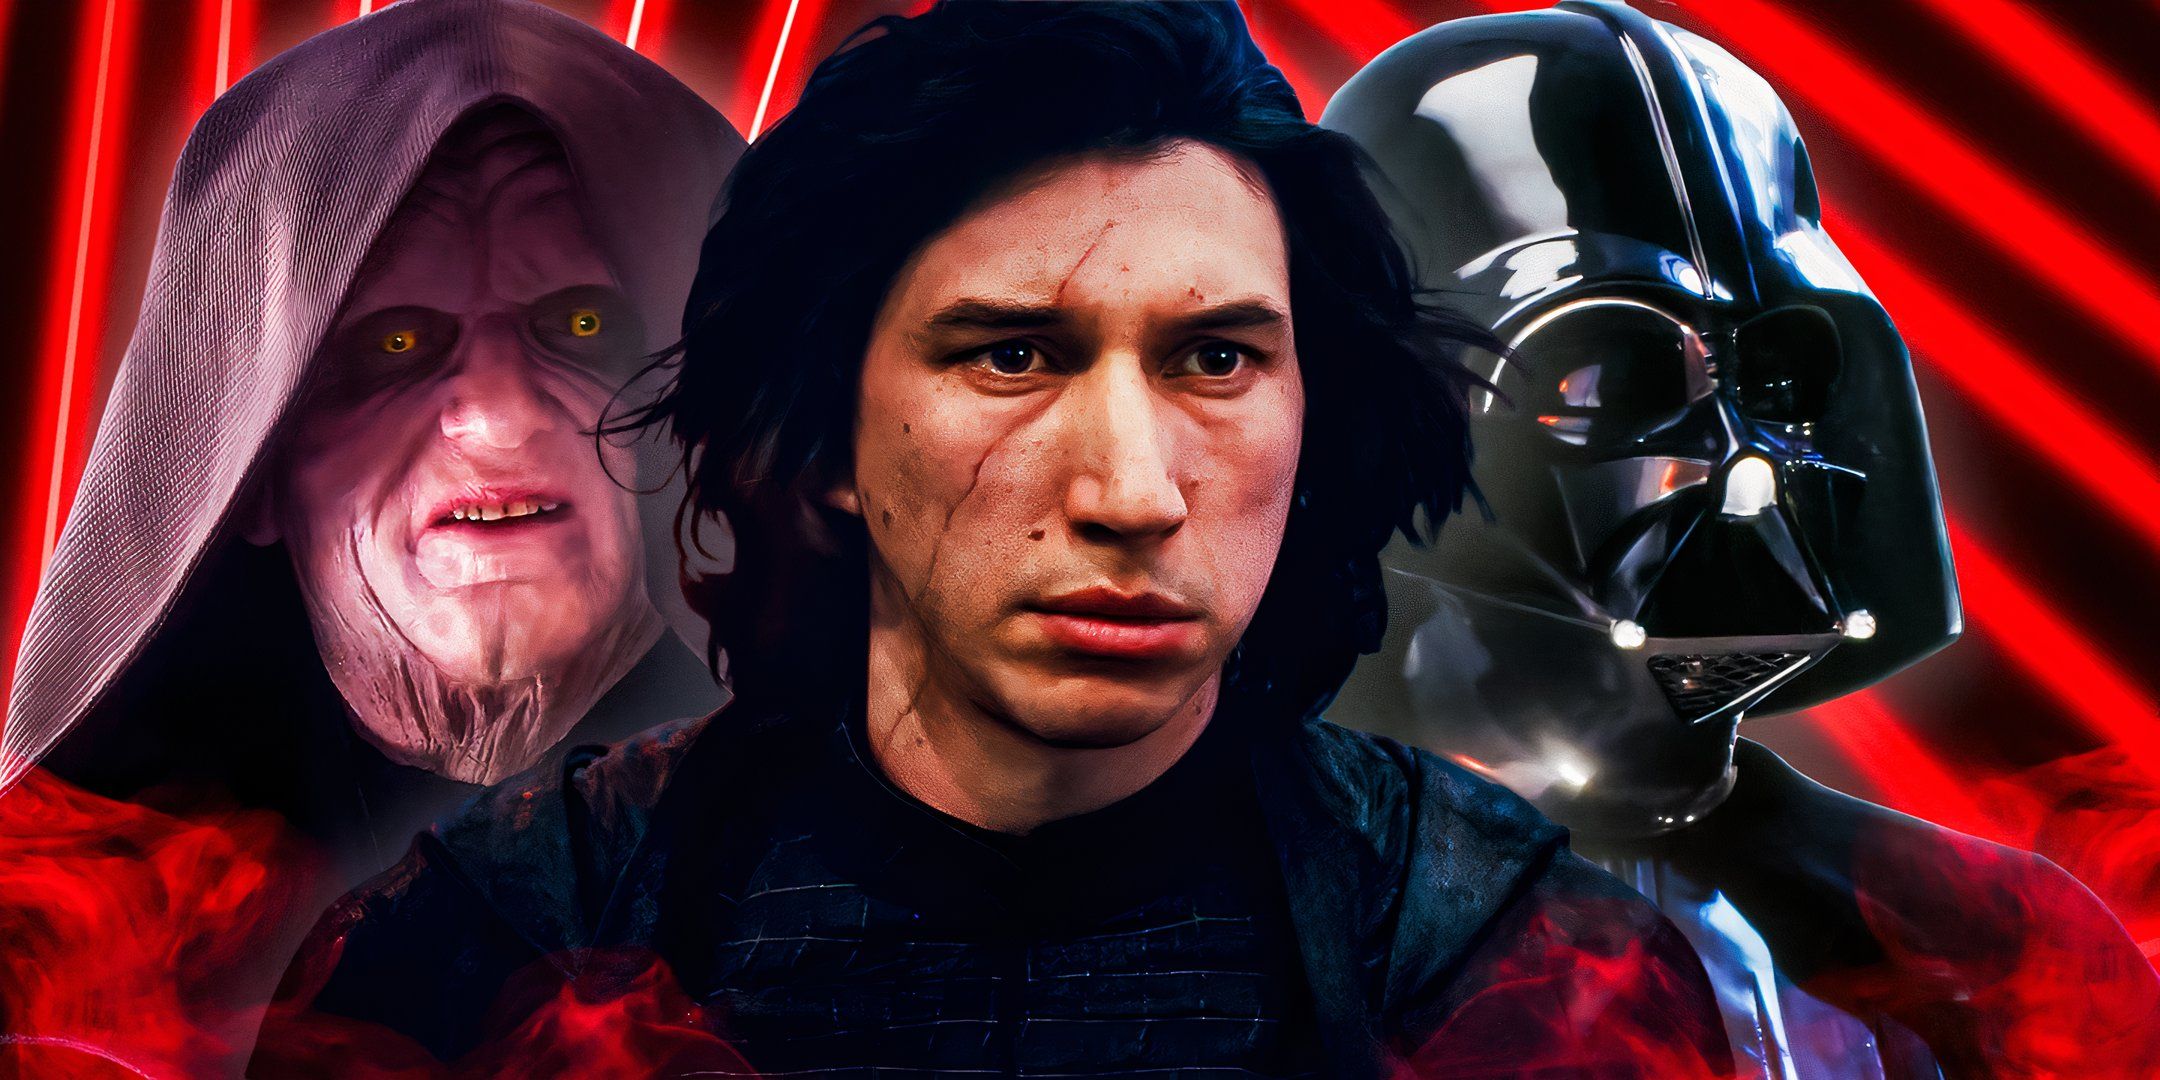 Kylo Ren, Darth Vader and Palpatine From The Star Wars Franchise